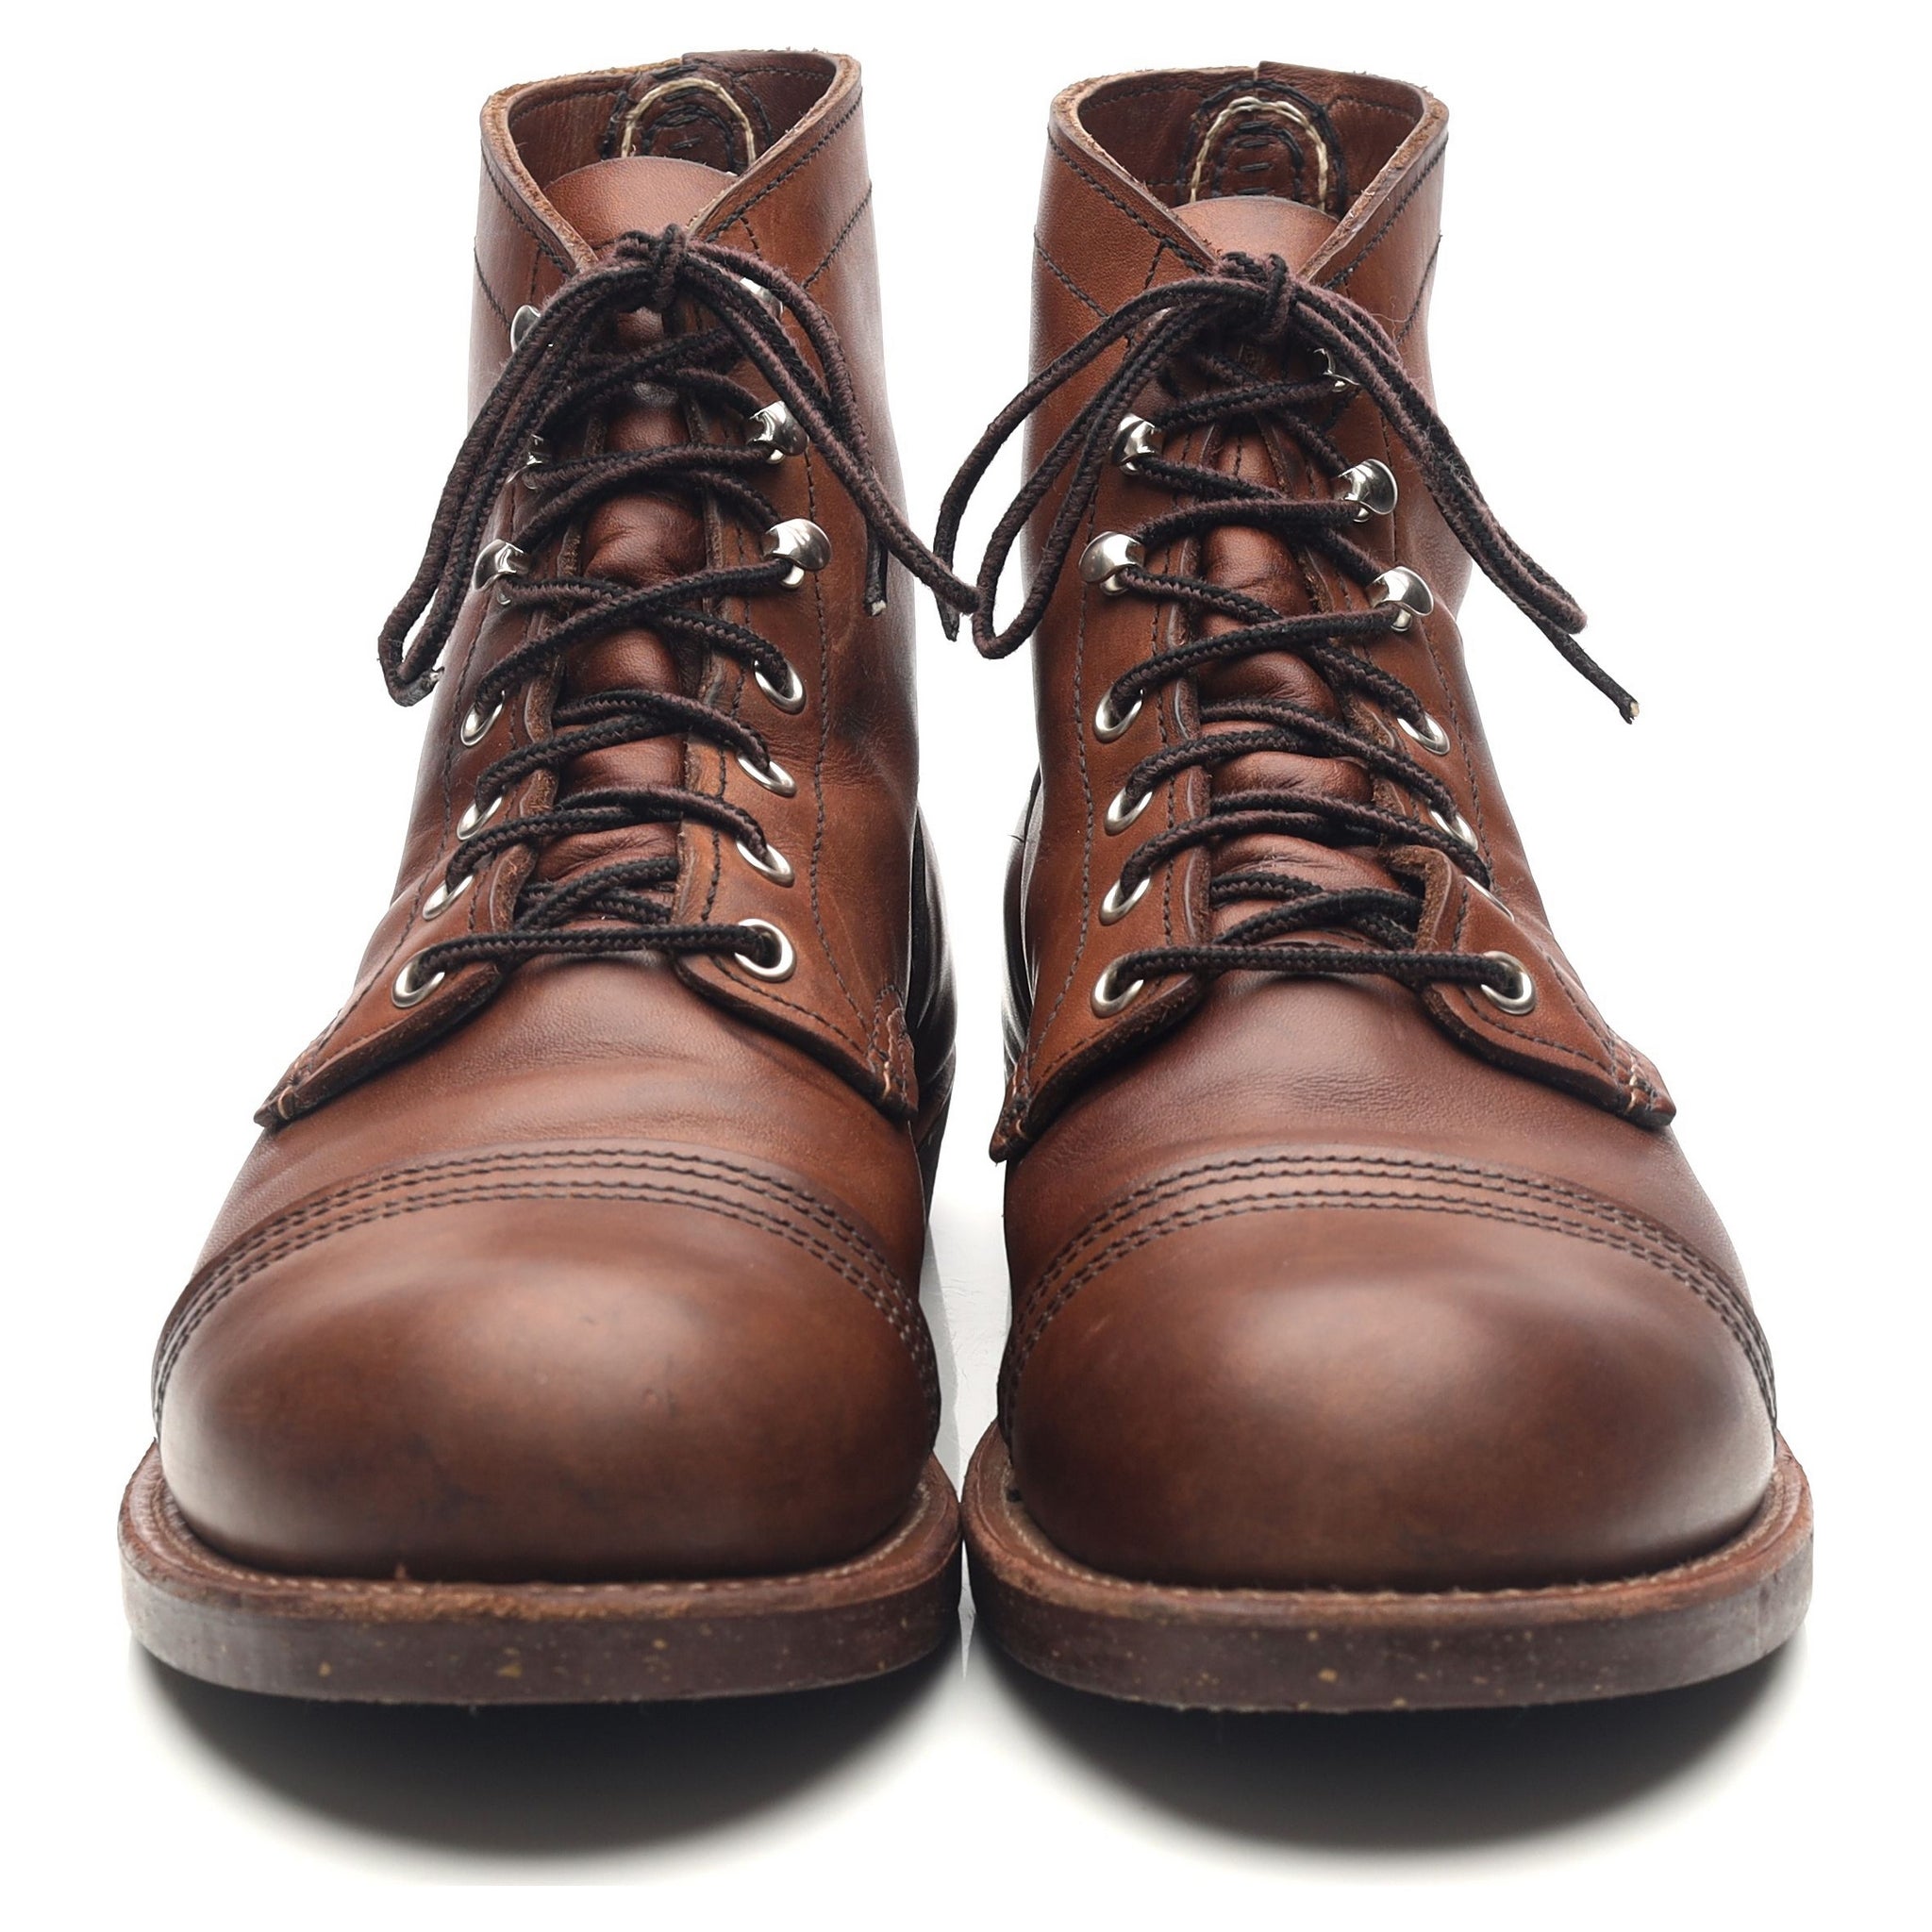 '8111' Brown Leather Iron Ranger Boots UK 9 US 10 - Abbot's Shoes